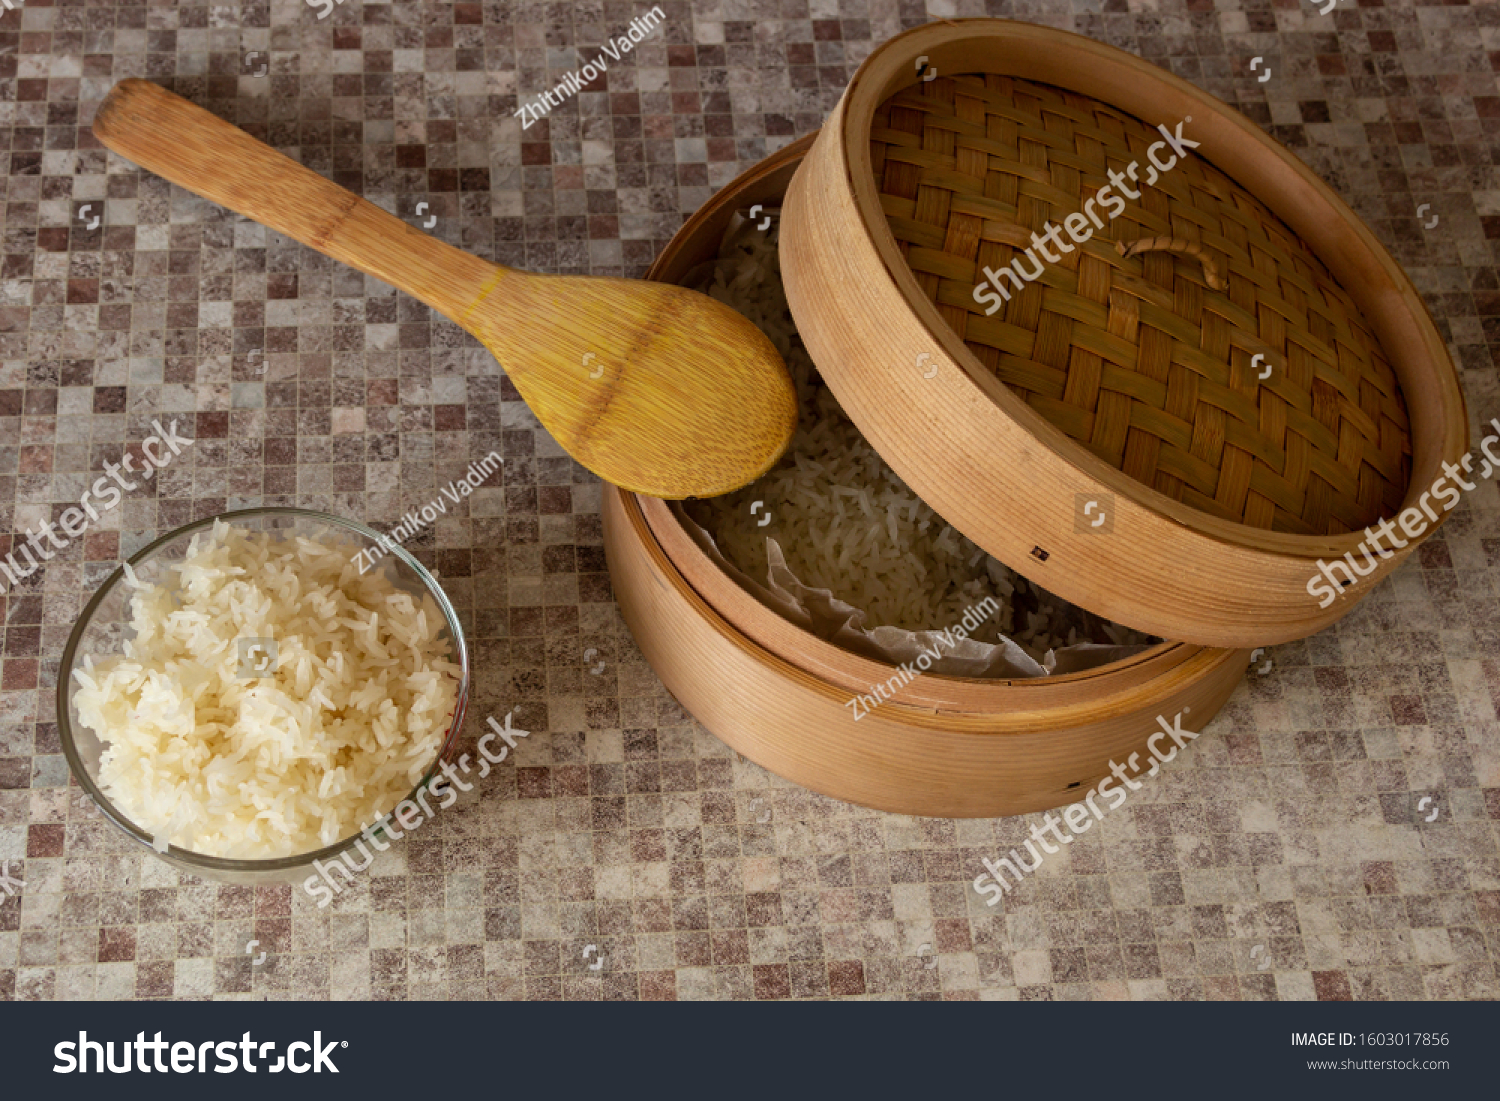 Rice cooked in a traditional wooden steamer has a special taste. You can eat it as a separate dish, as a side dish, or as an addition or ingredient to other dishes. In any case, it is very healthy. #1603017856